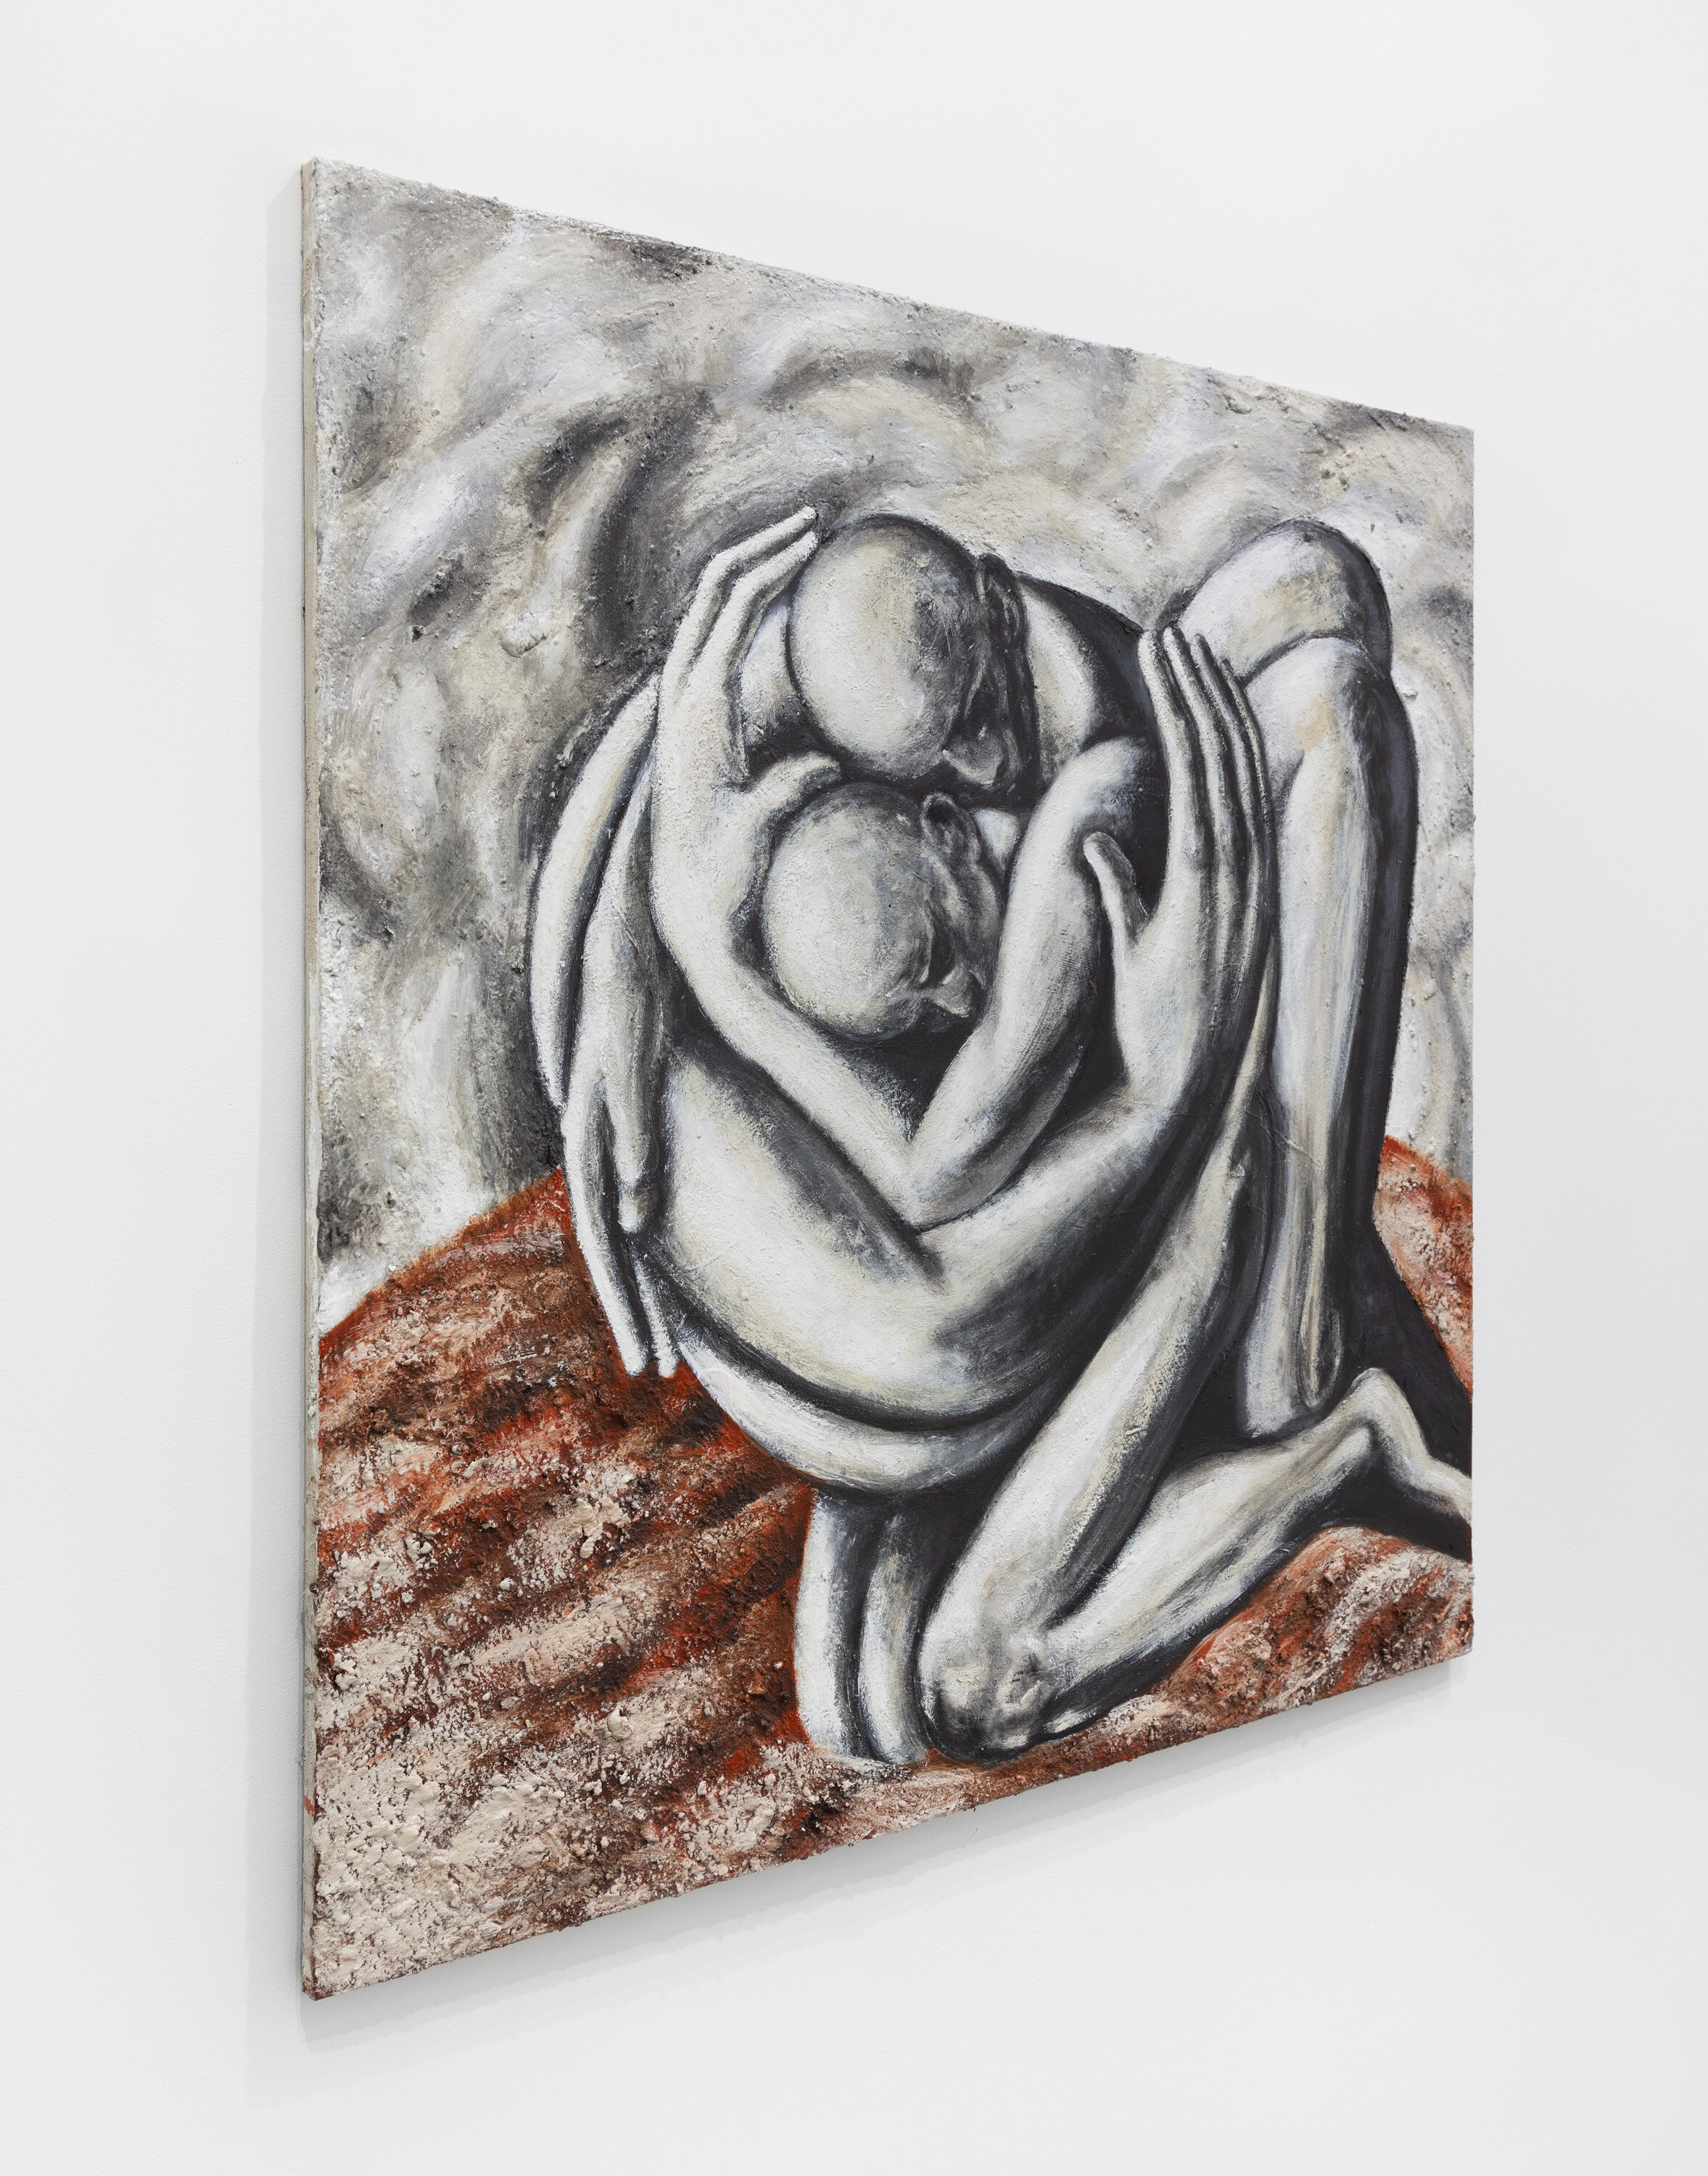   The Embrace  Graphite, filler, clay, PVA on canvas 40 × 40 in. (101.6 × 101.6 cm) 2021  Prints Available 